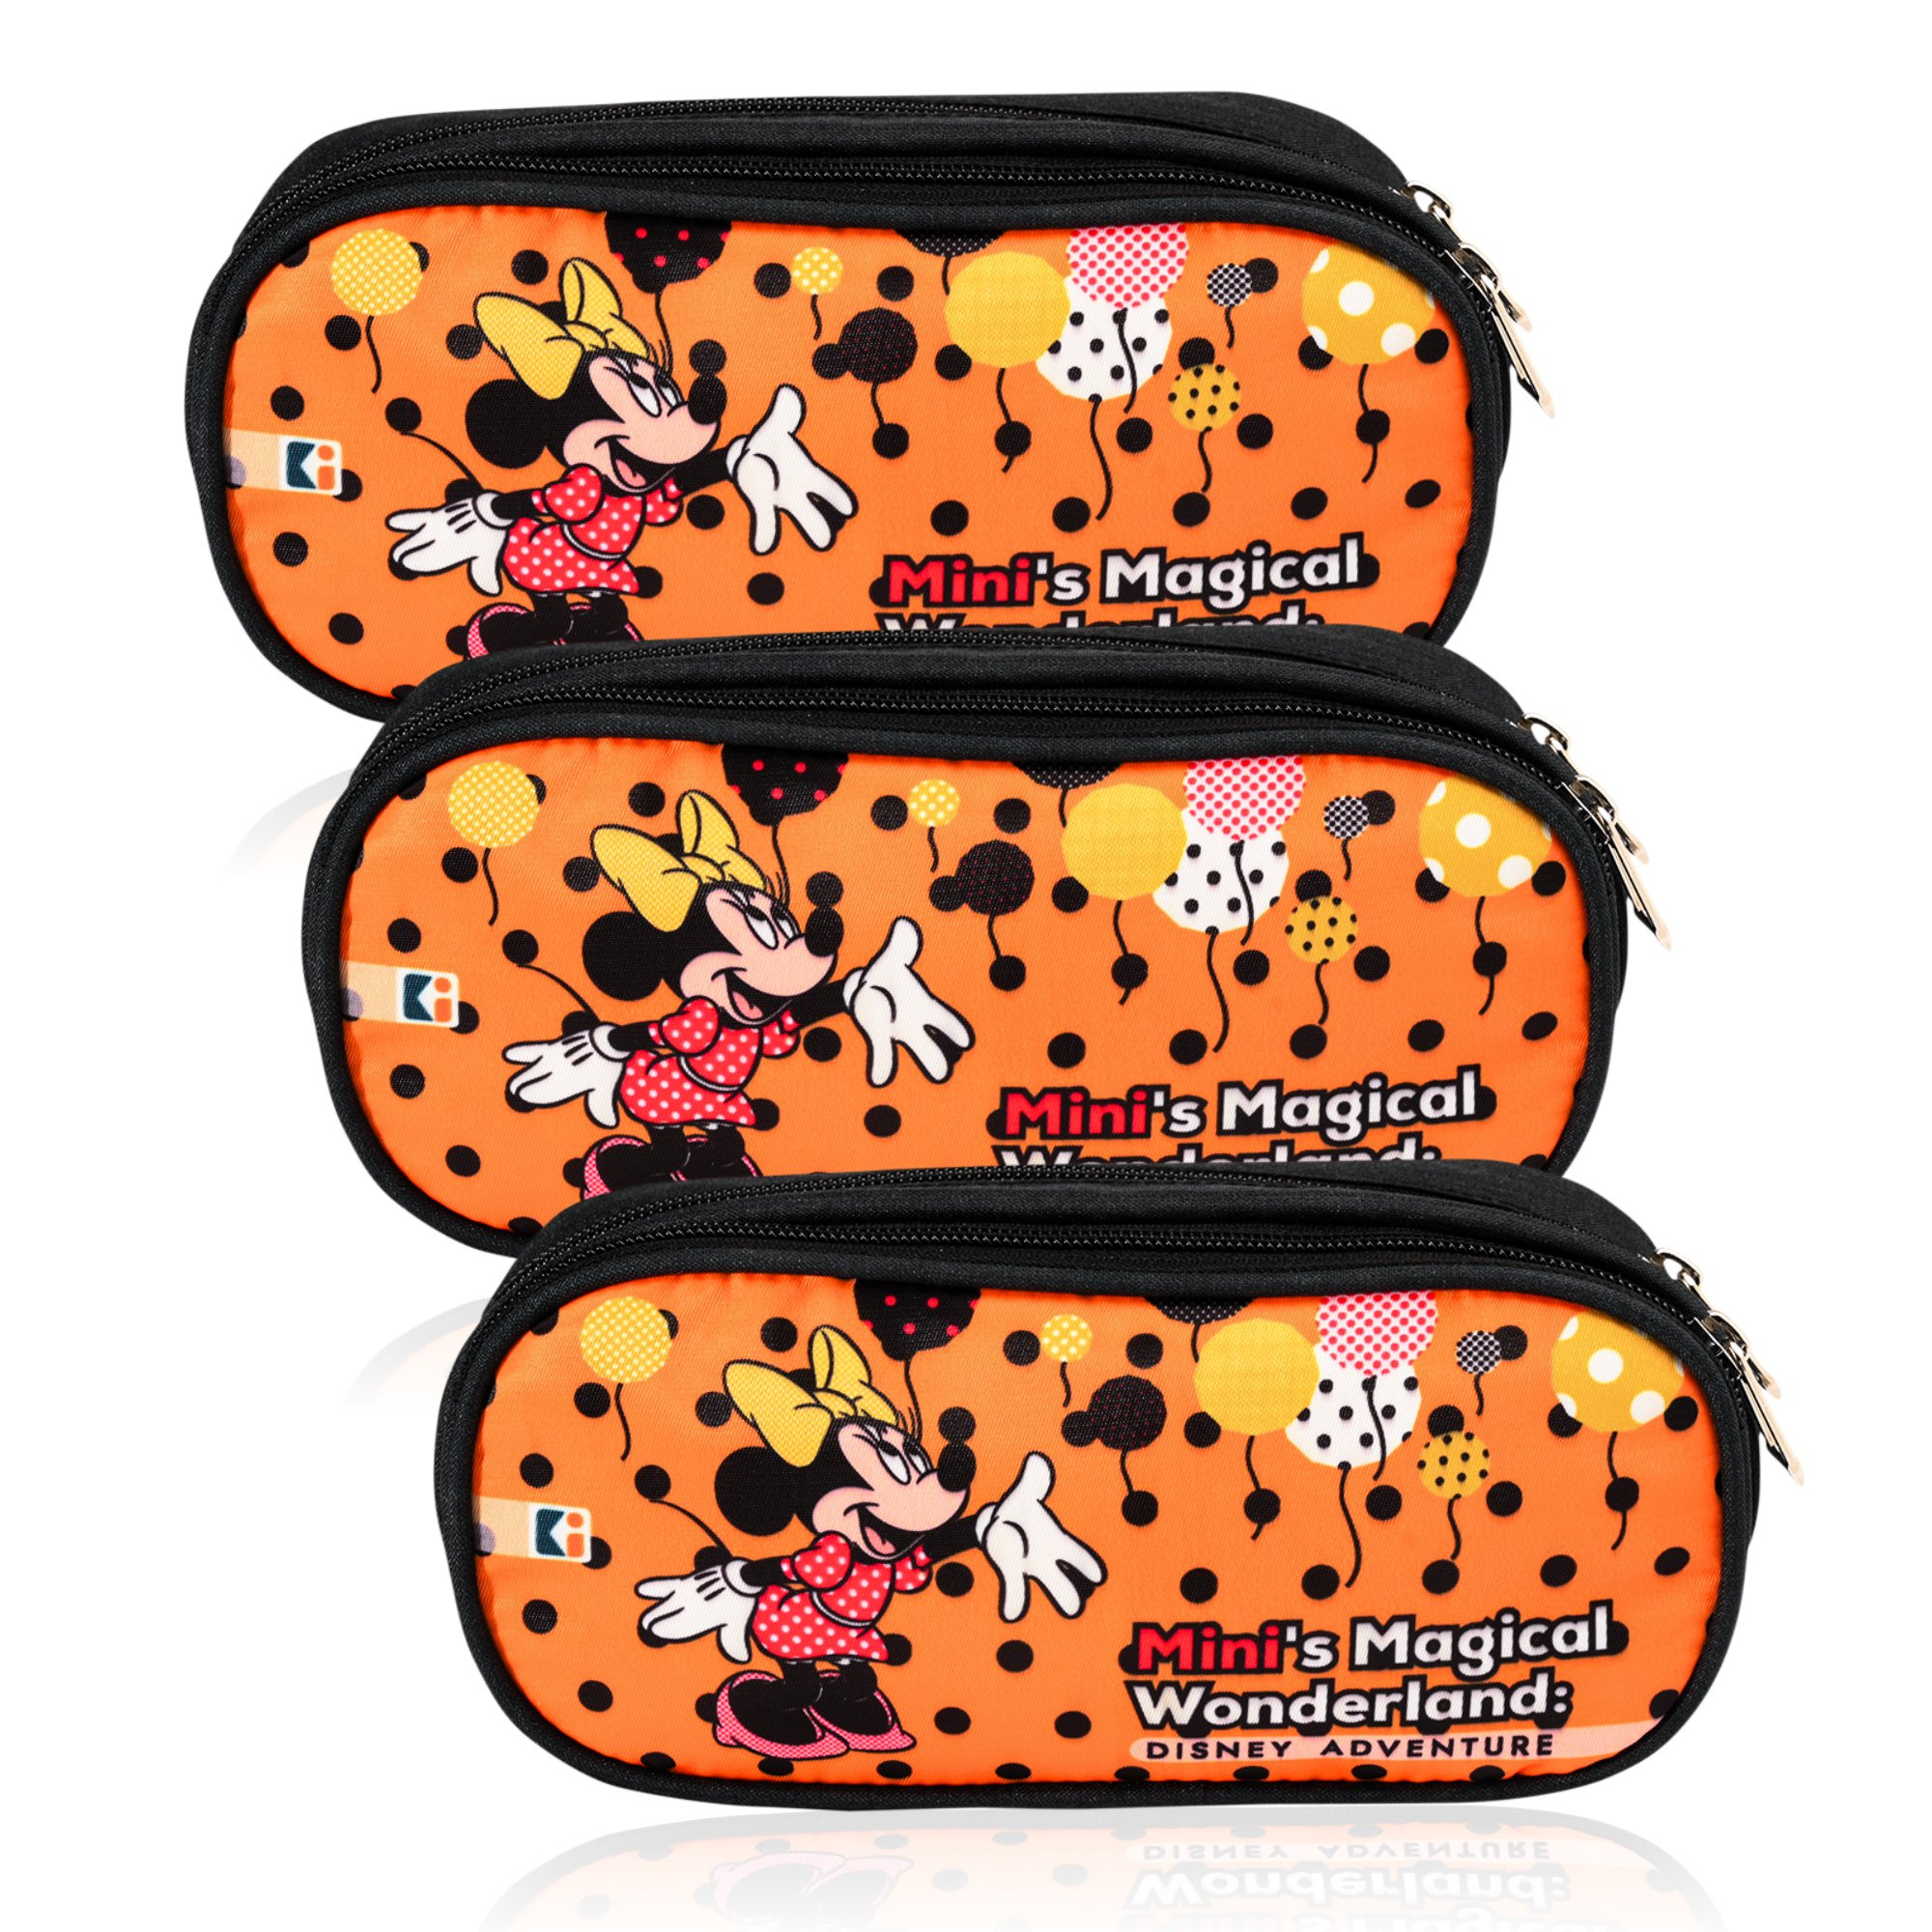 Kuber Industries Pencil Pouch | Multi-Purpose Travel Pouch | 2 Compartments Utility Pouch | Waterproof Stationary Bag | Geometry Box | Disney Minnie Magic | Orange & Green